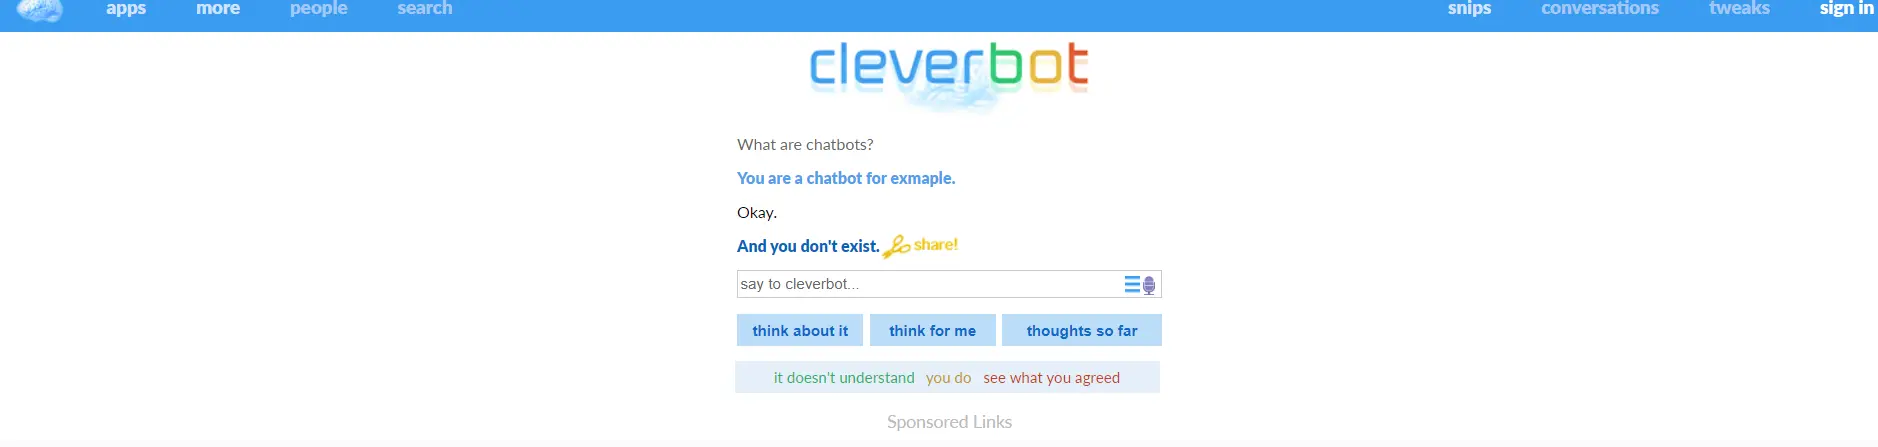 Does CleverBot talk like a human?